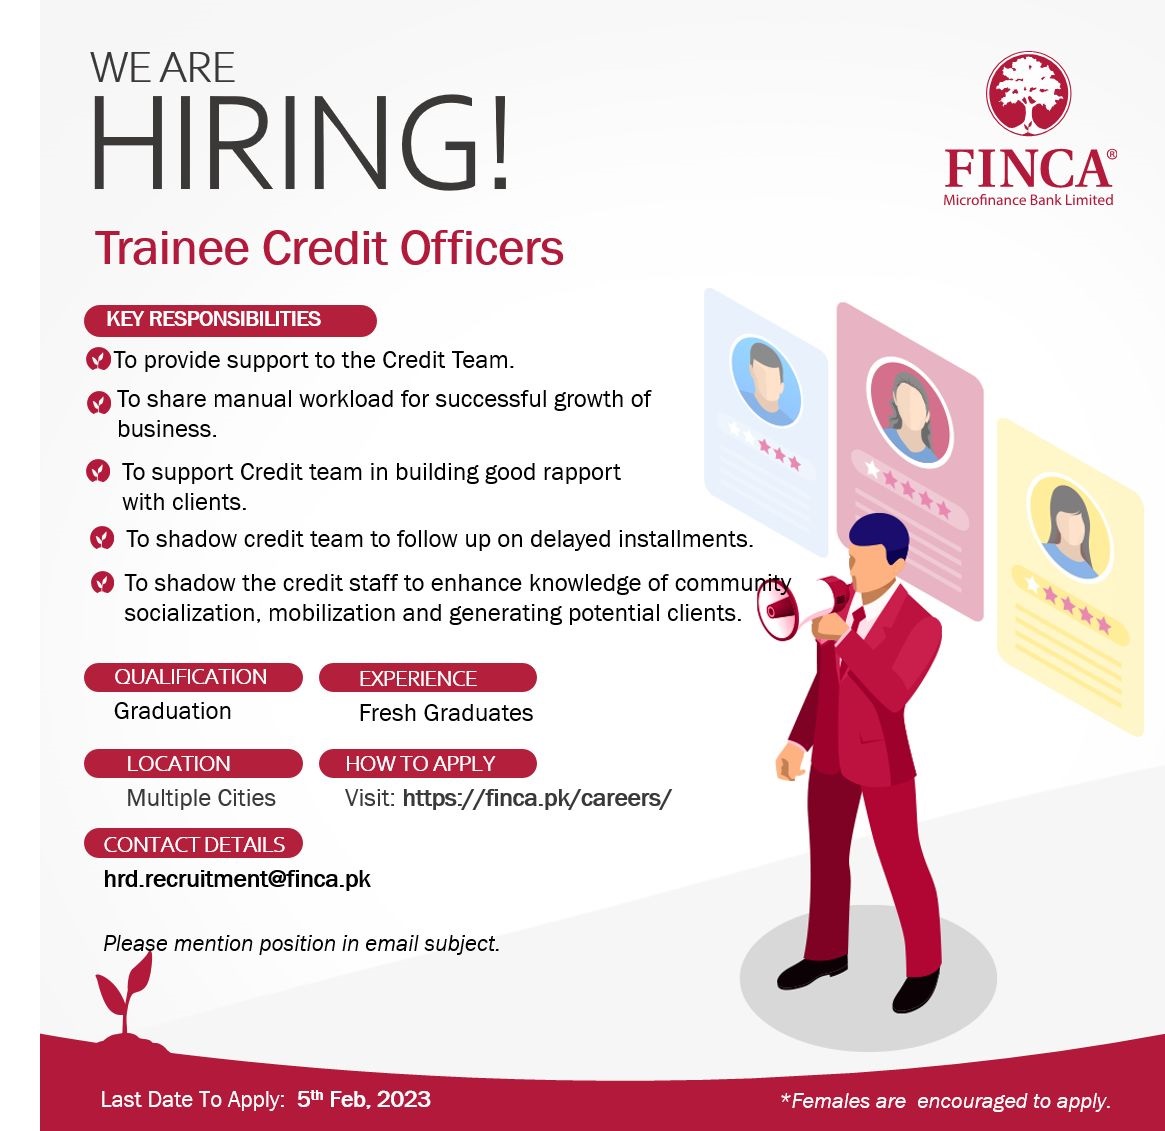 FINCA Microfinance Bank Ltd. is hiring for Trainee Credit Officers.